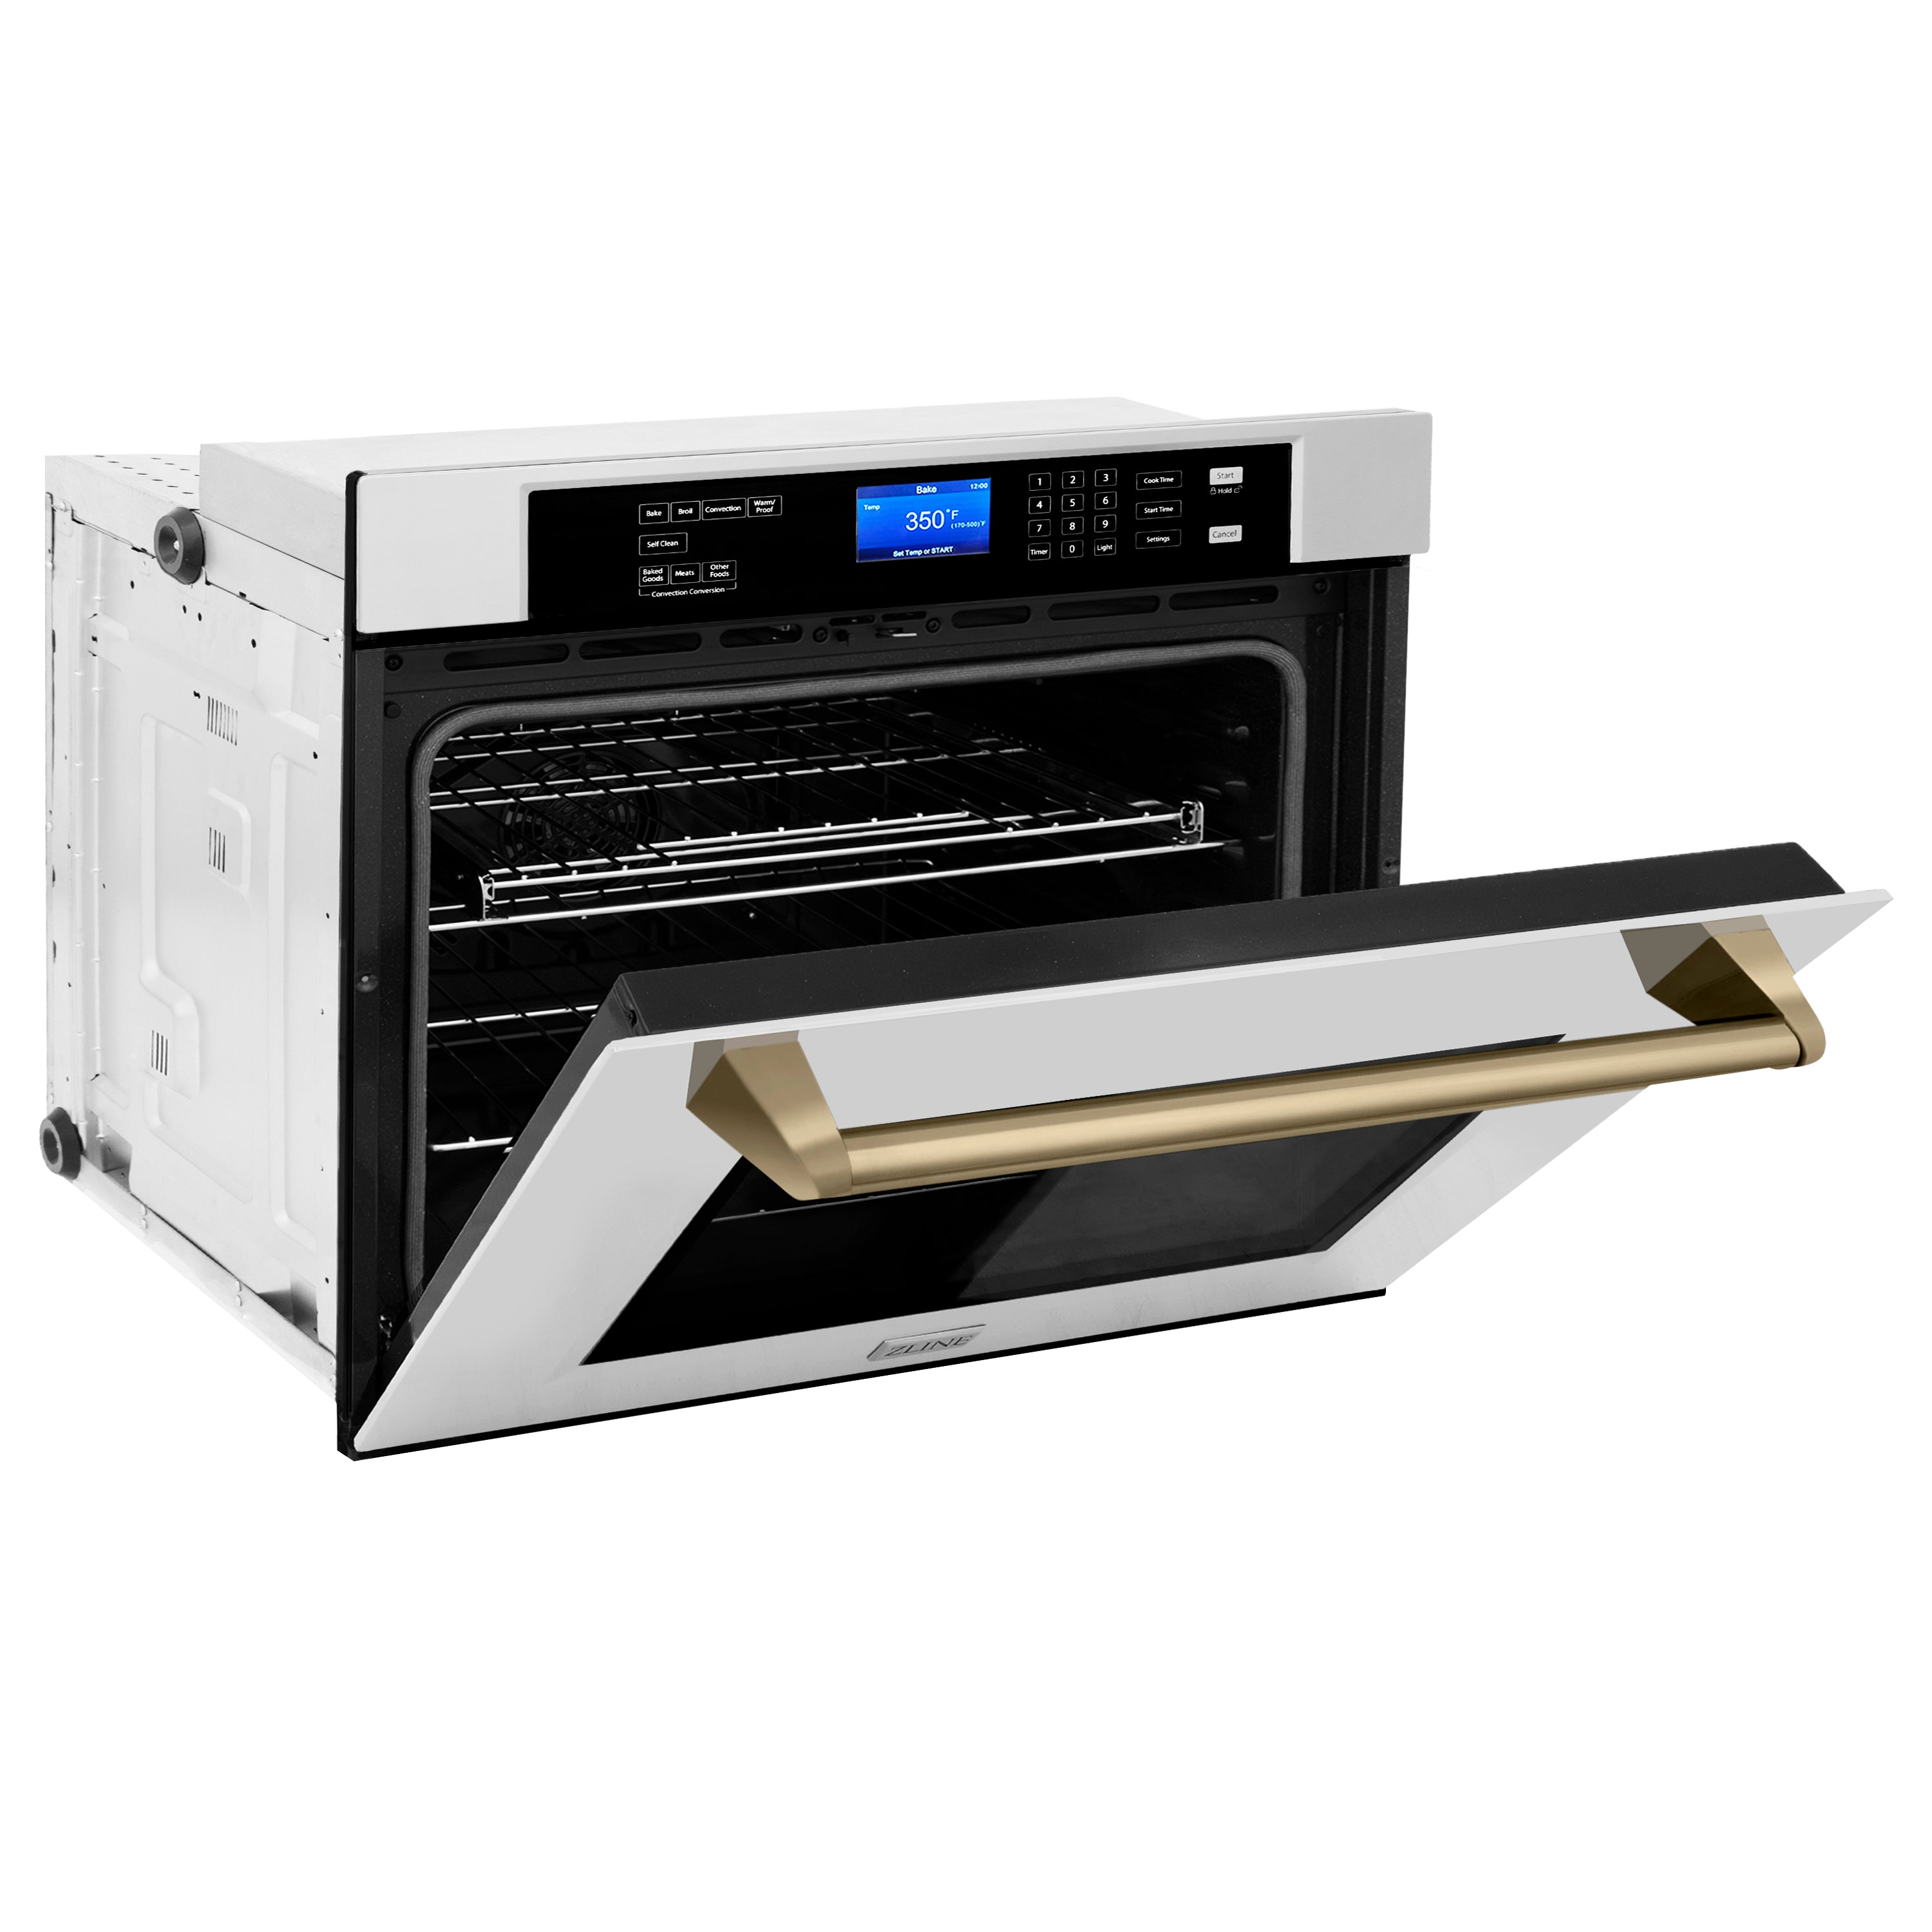 ZLINE 30" Autograph Edition Single Wall Oven with Self Clean and True Convection in Stainless Steel and Champagne Bronze (AWSZ-30-CB)